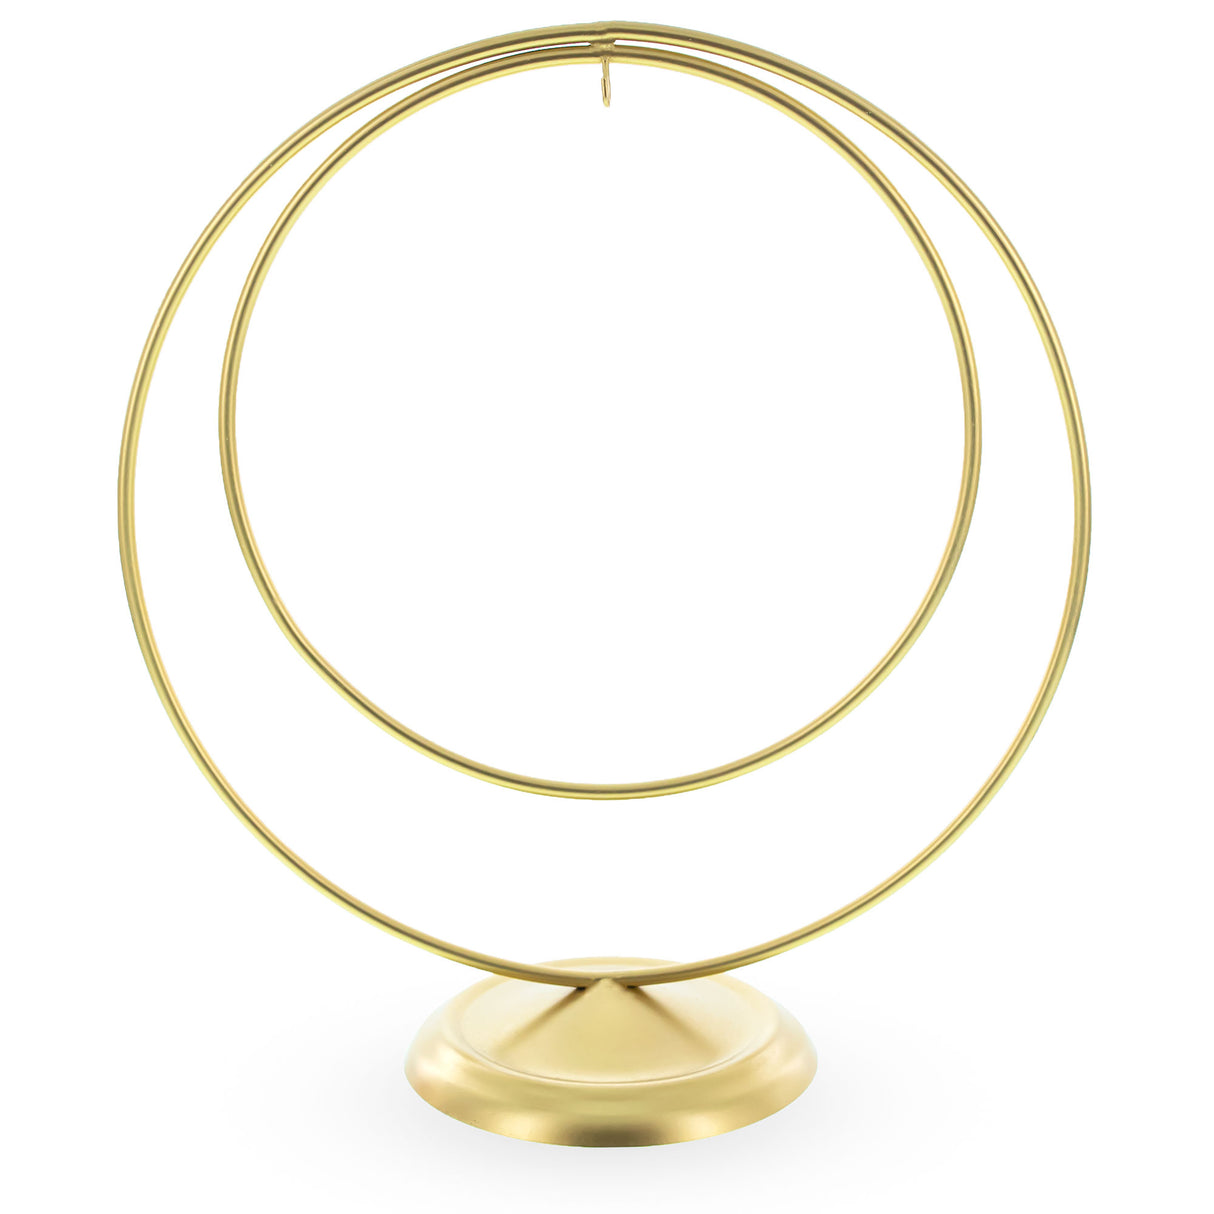 Metal Double Circle Gold Metal Solid Round Base Ornament Display Stand 8.25 Inches in Gold color